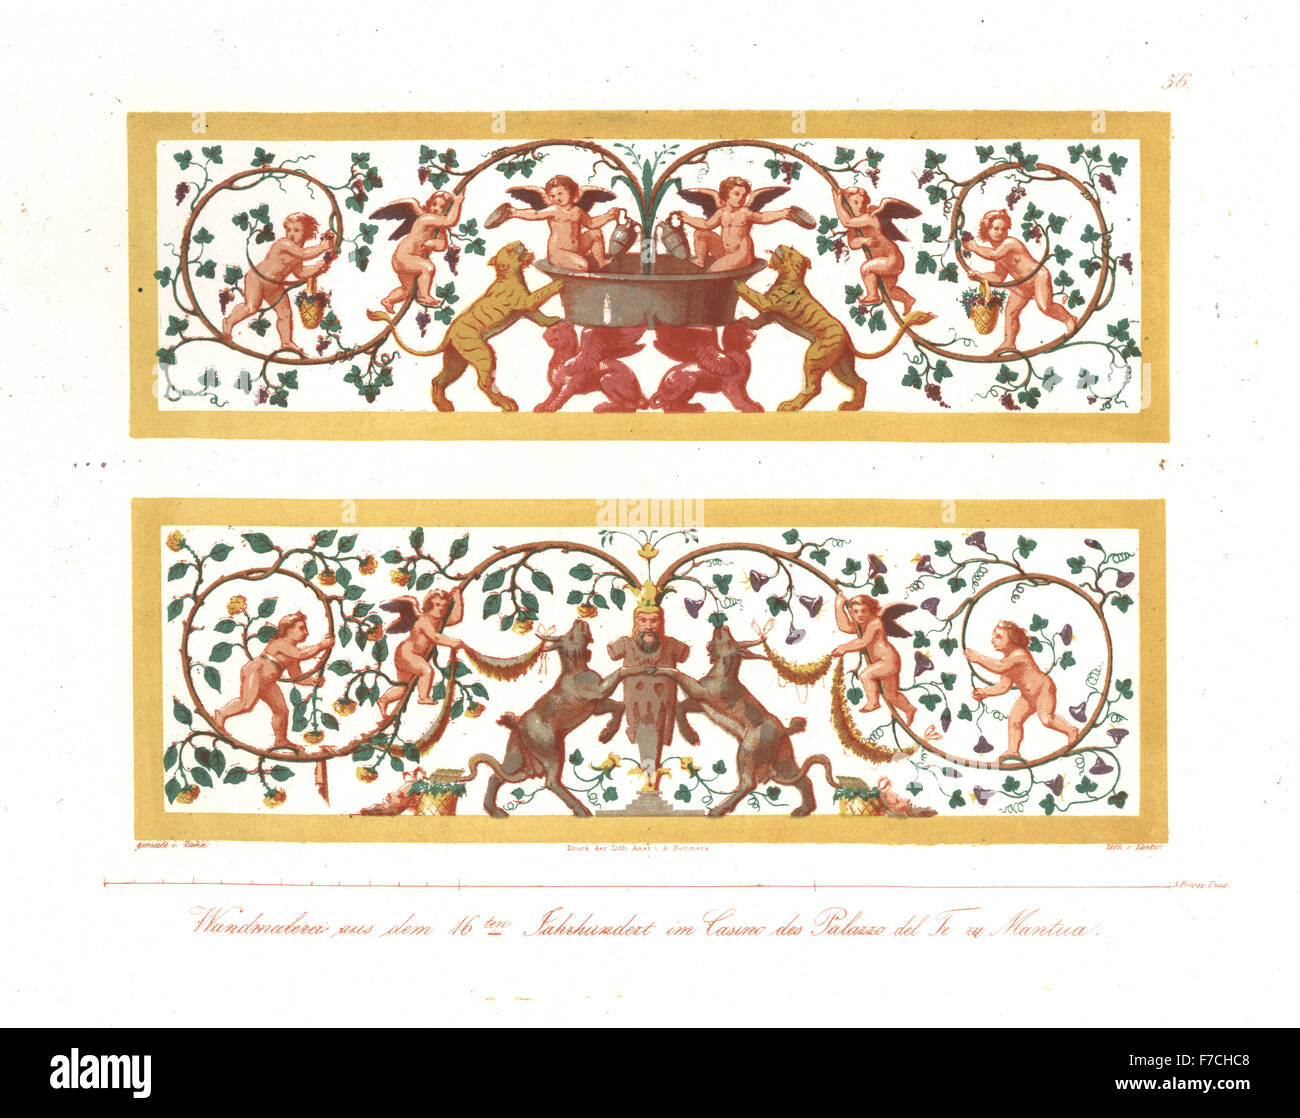 Wall paintings of cupids, tigers, goats, grapes and roses from the Casino, Palazzo del Te, Mantua, Italy, 16th century. Handcoloured lithograph by Konter after an illustration by Wilhelm Zahn from his Ornament of All Classical Art Eras, Ornamente aller klassischen Kunst-Epochen, Reimer, Berlin, 1834. Stock Photo